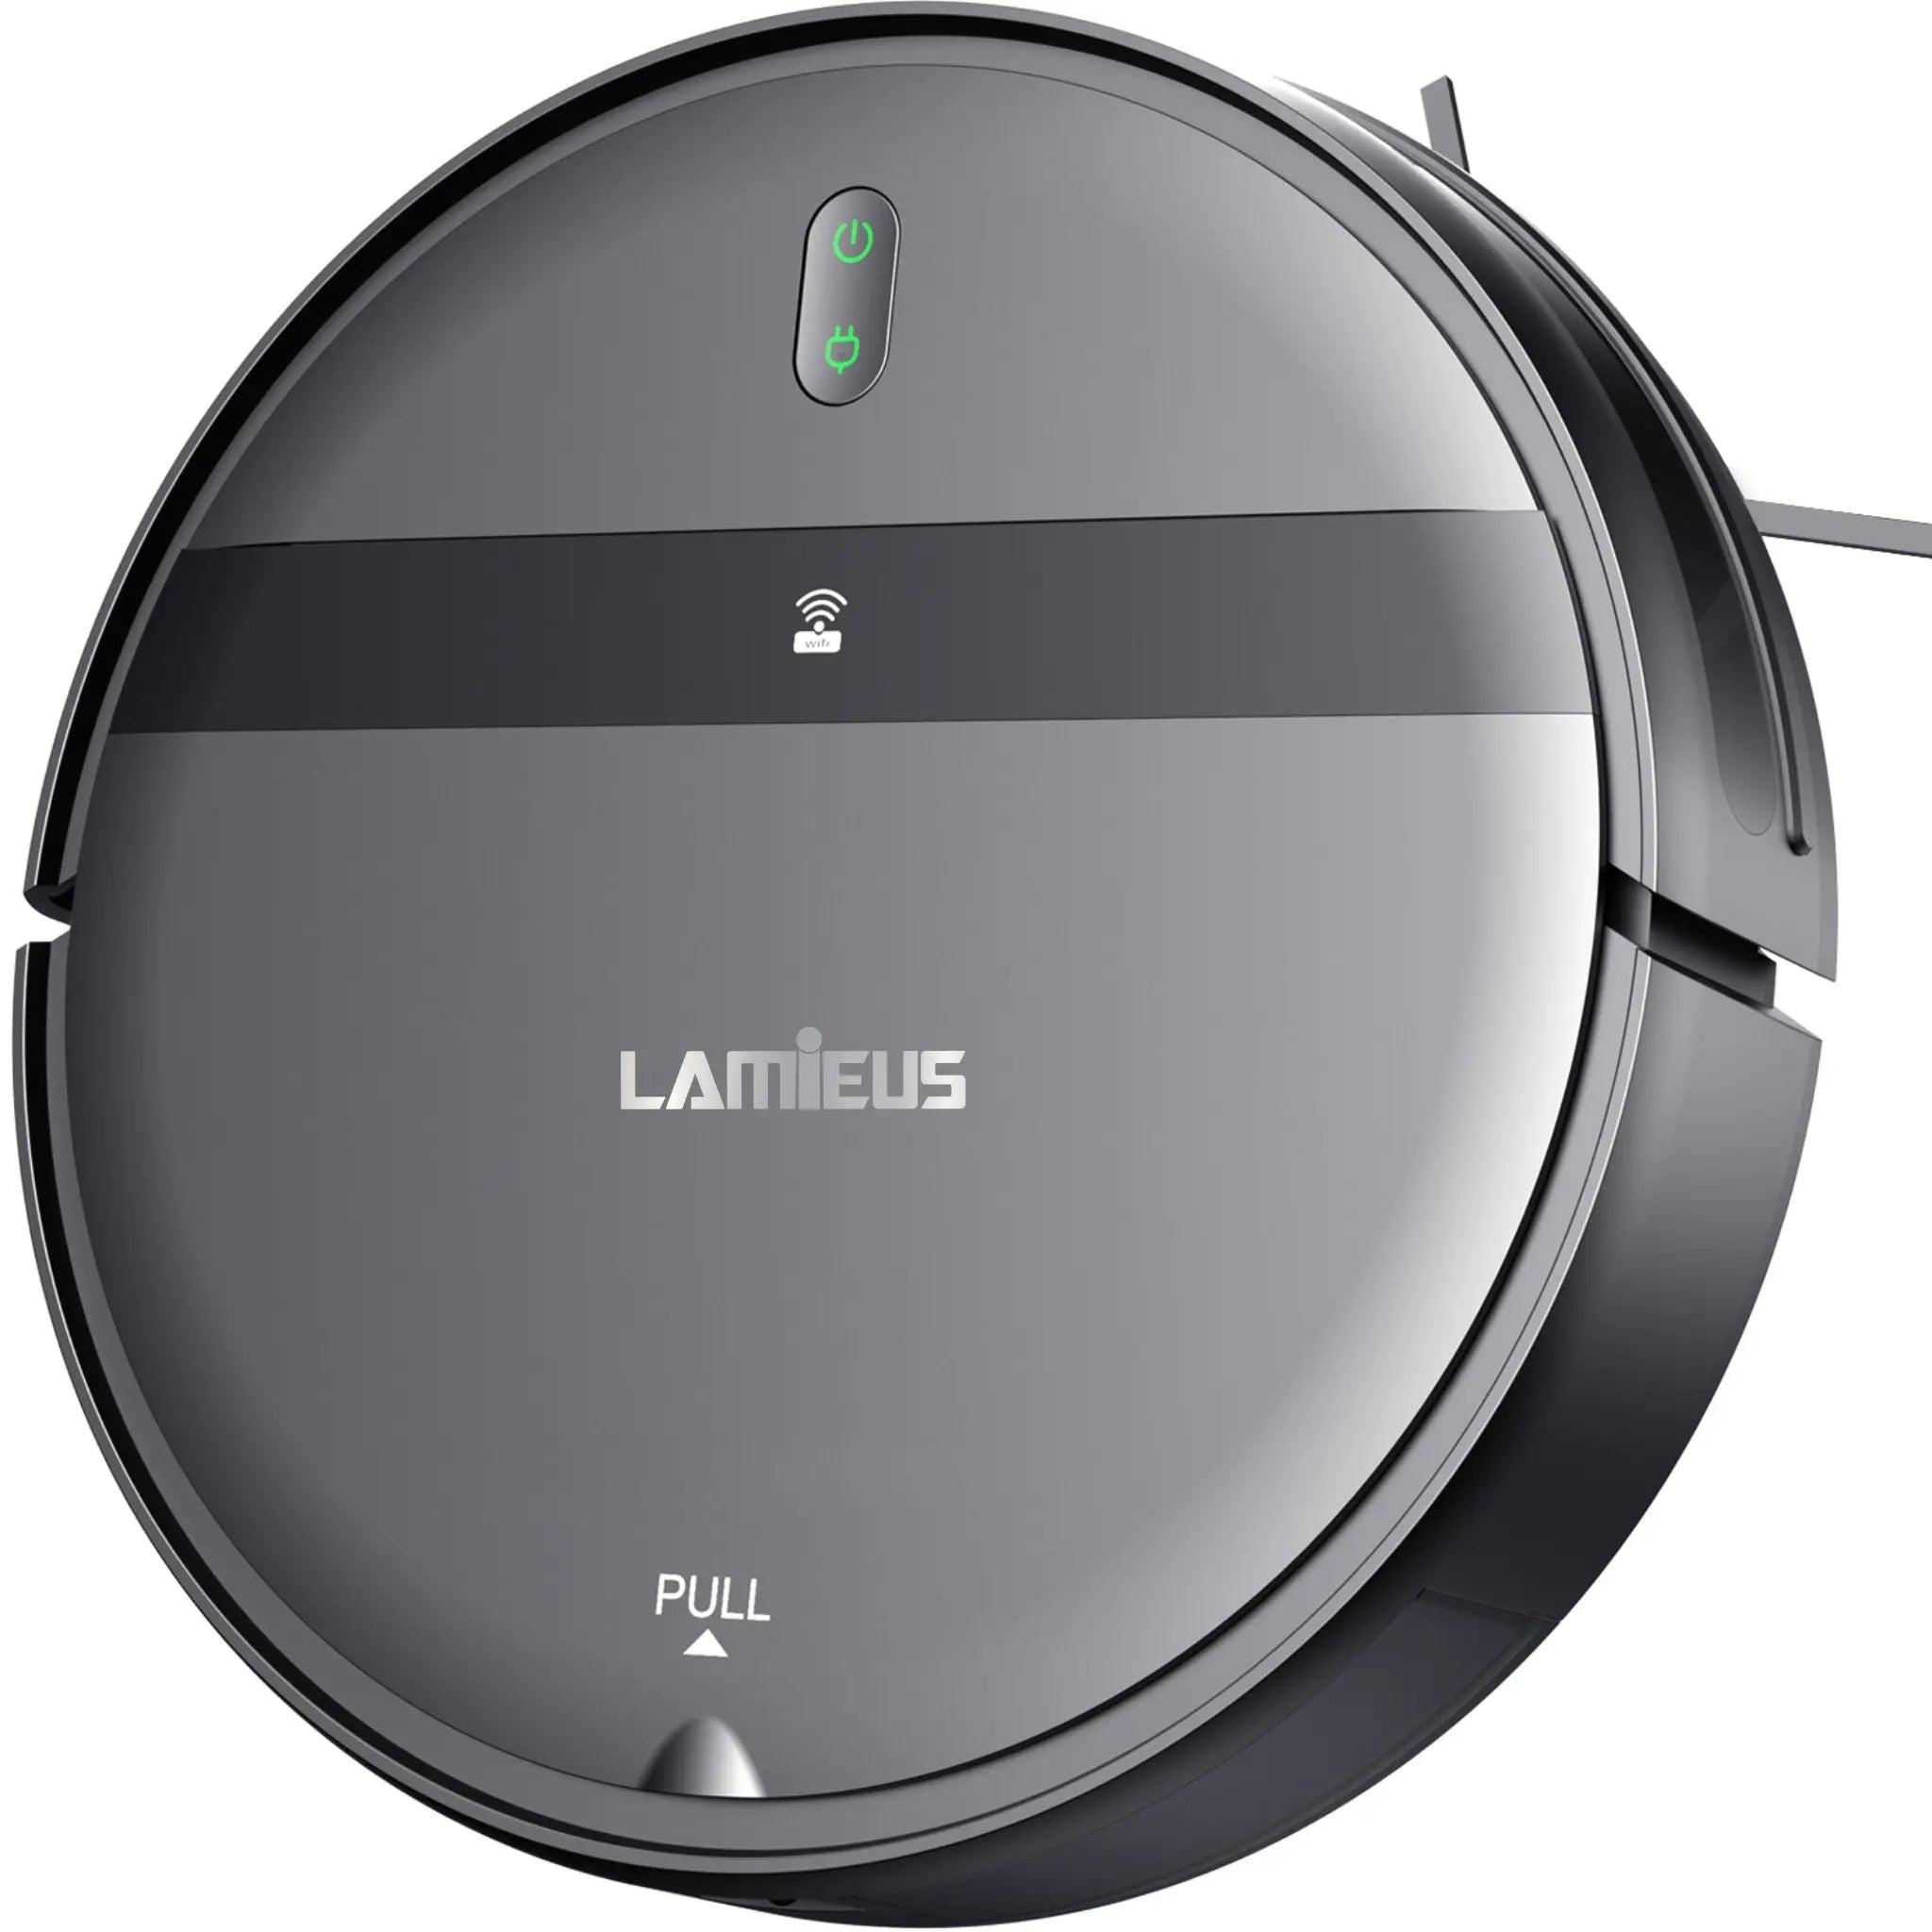 SweepGuard Quantum Vacuum Cleaner - Lamieus: Ultimate robotic cleaning solution. AI-driven navigation, intuitive scheduling, HEPA filtration. Quiet operation, long runtime